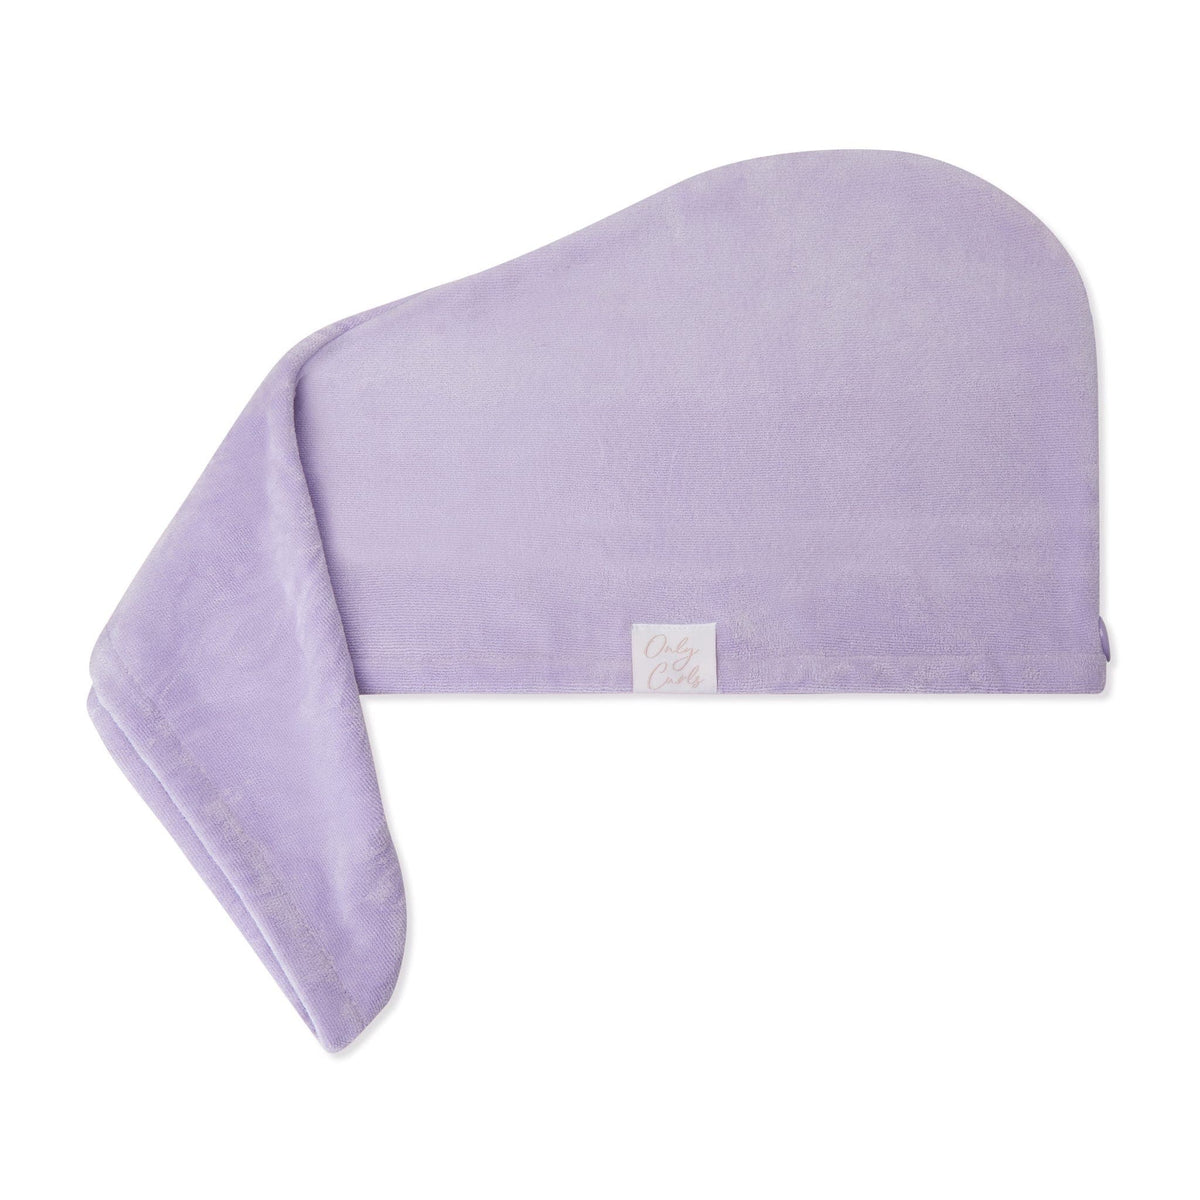 Only Curls Towel Turban - Lilac - Only Curls